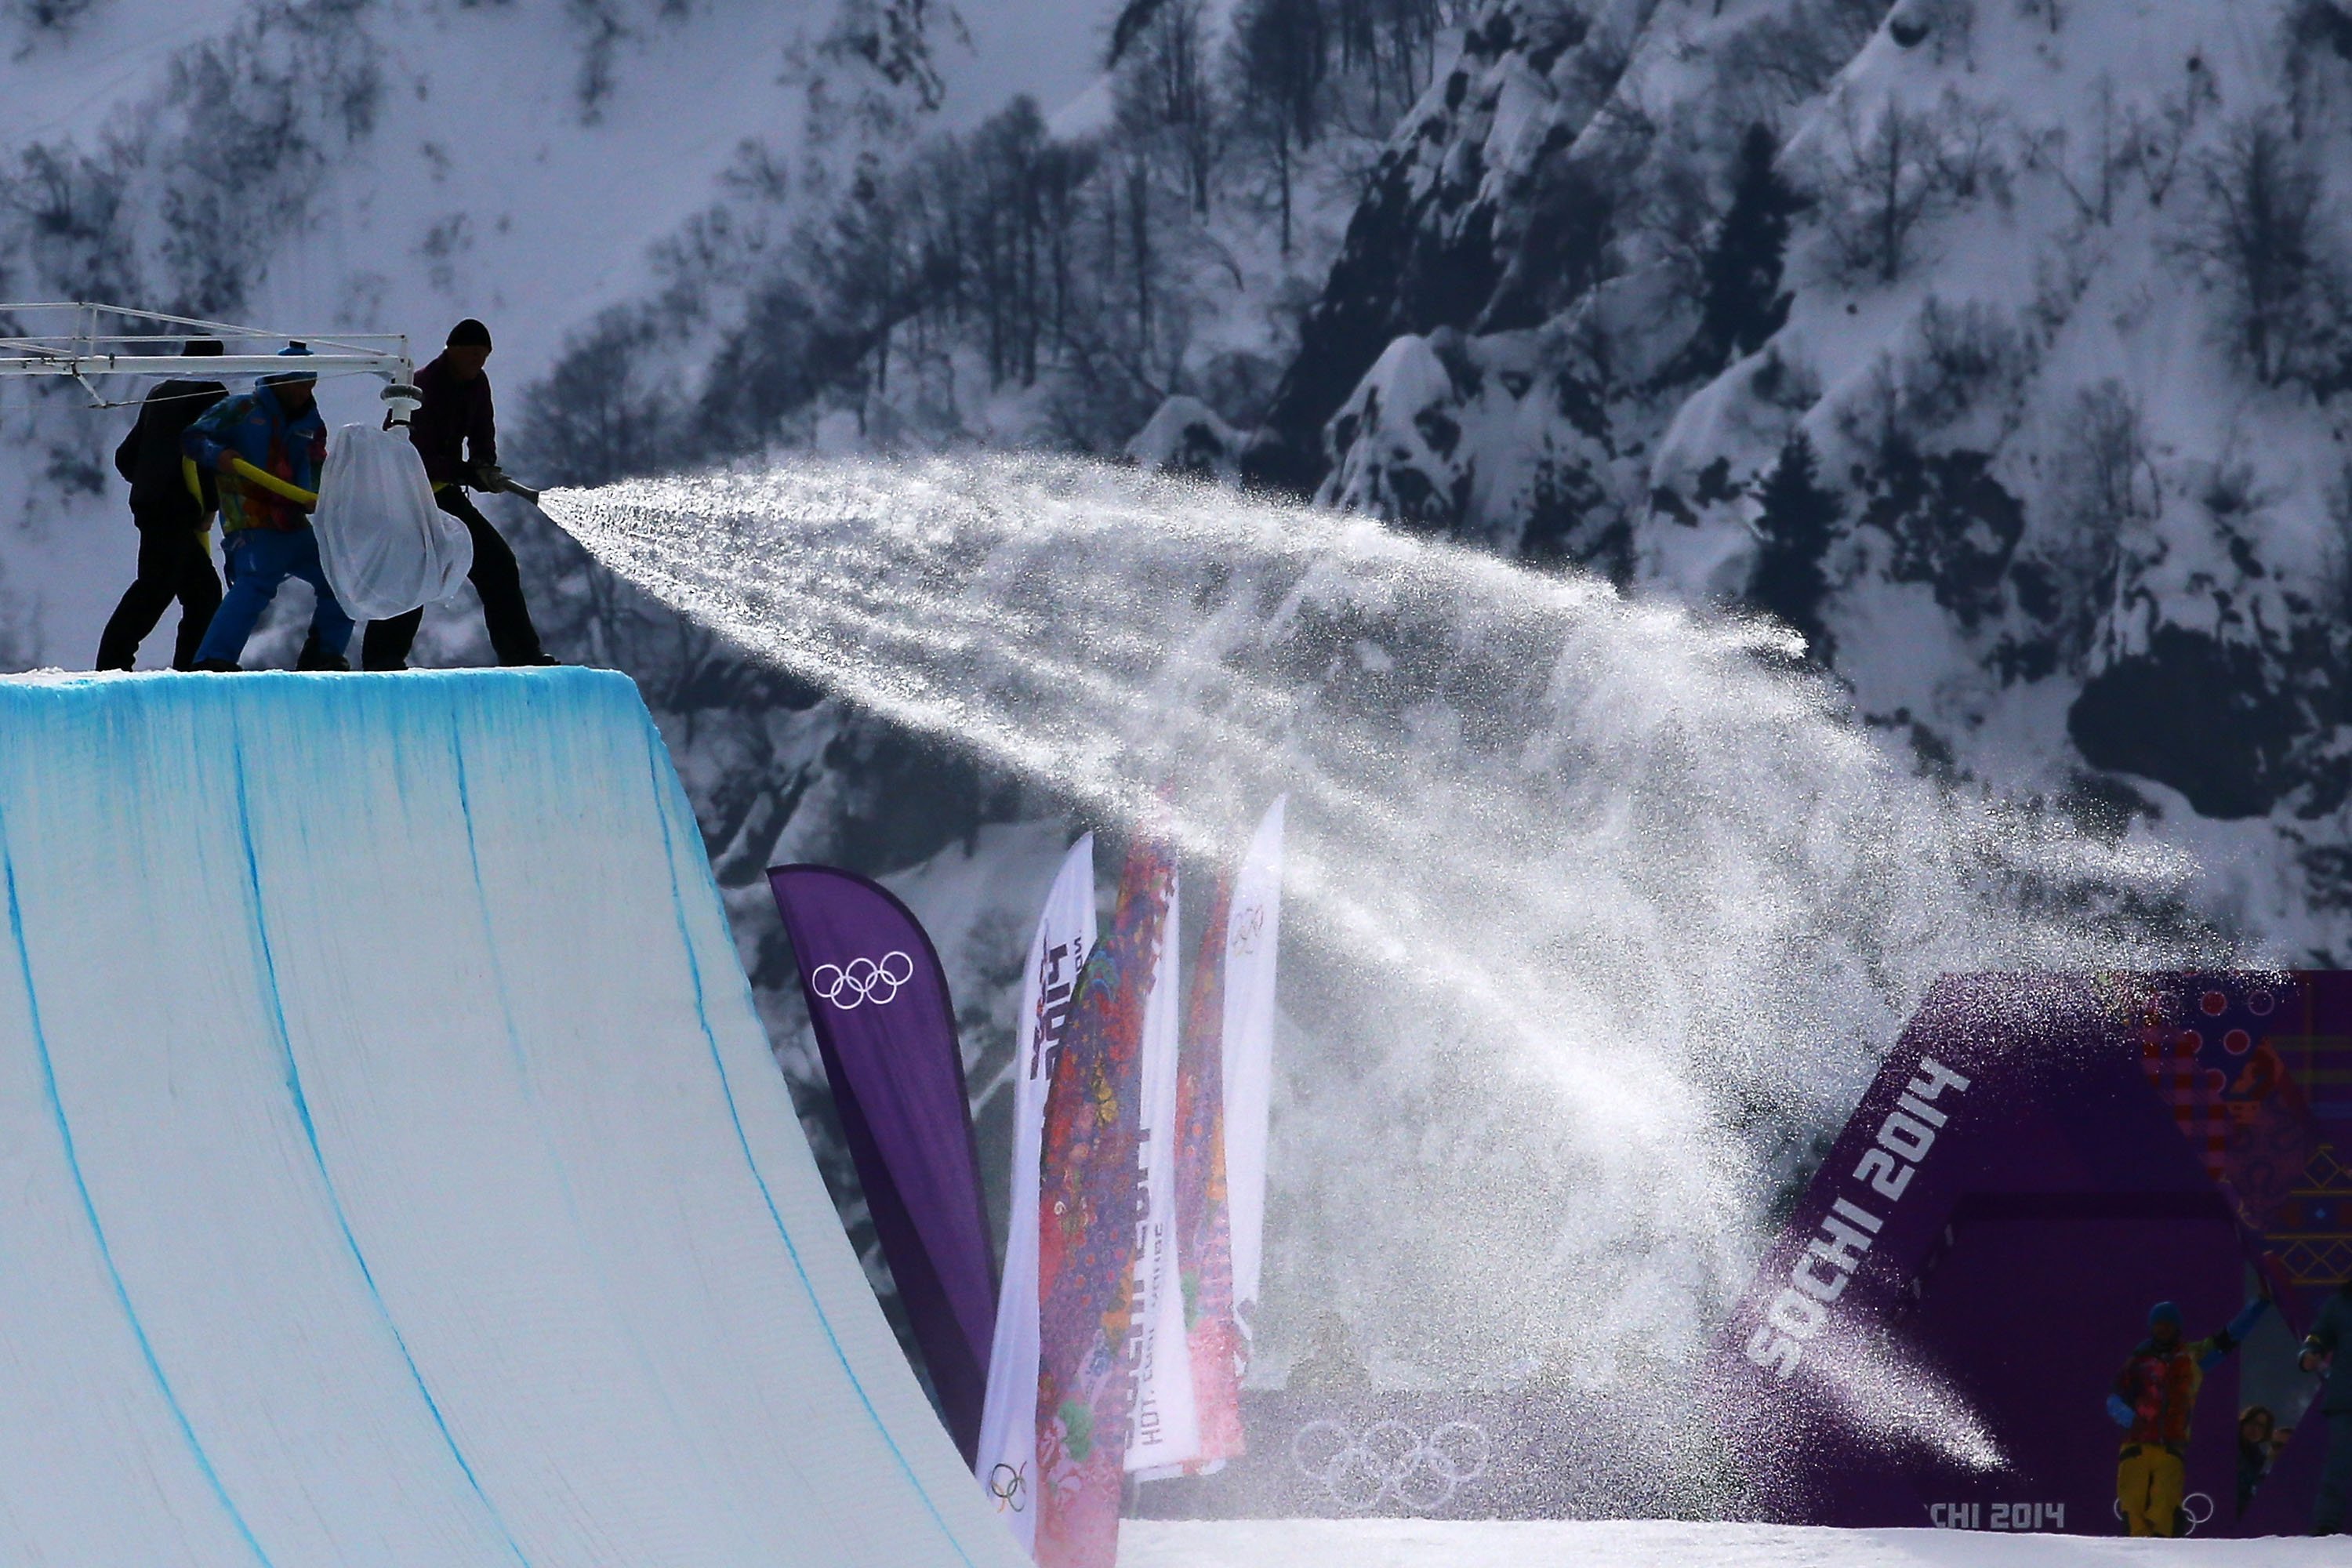 Workers spray down the halfpipe before competition begins in the Snowboard Men's Halfpipe Qualification Heats.